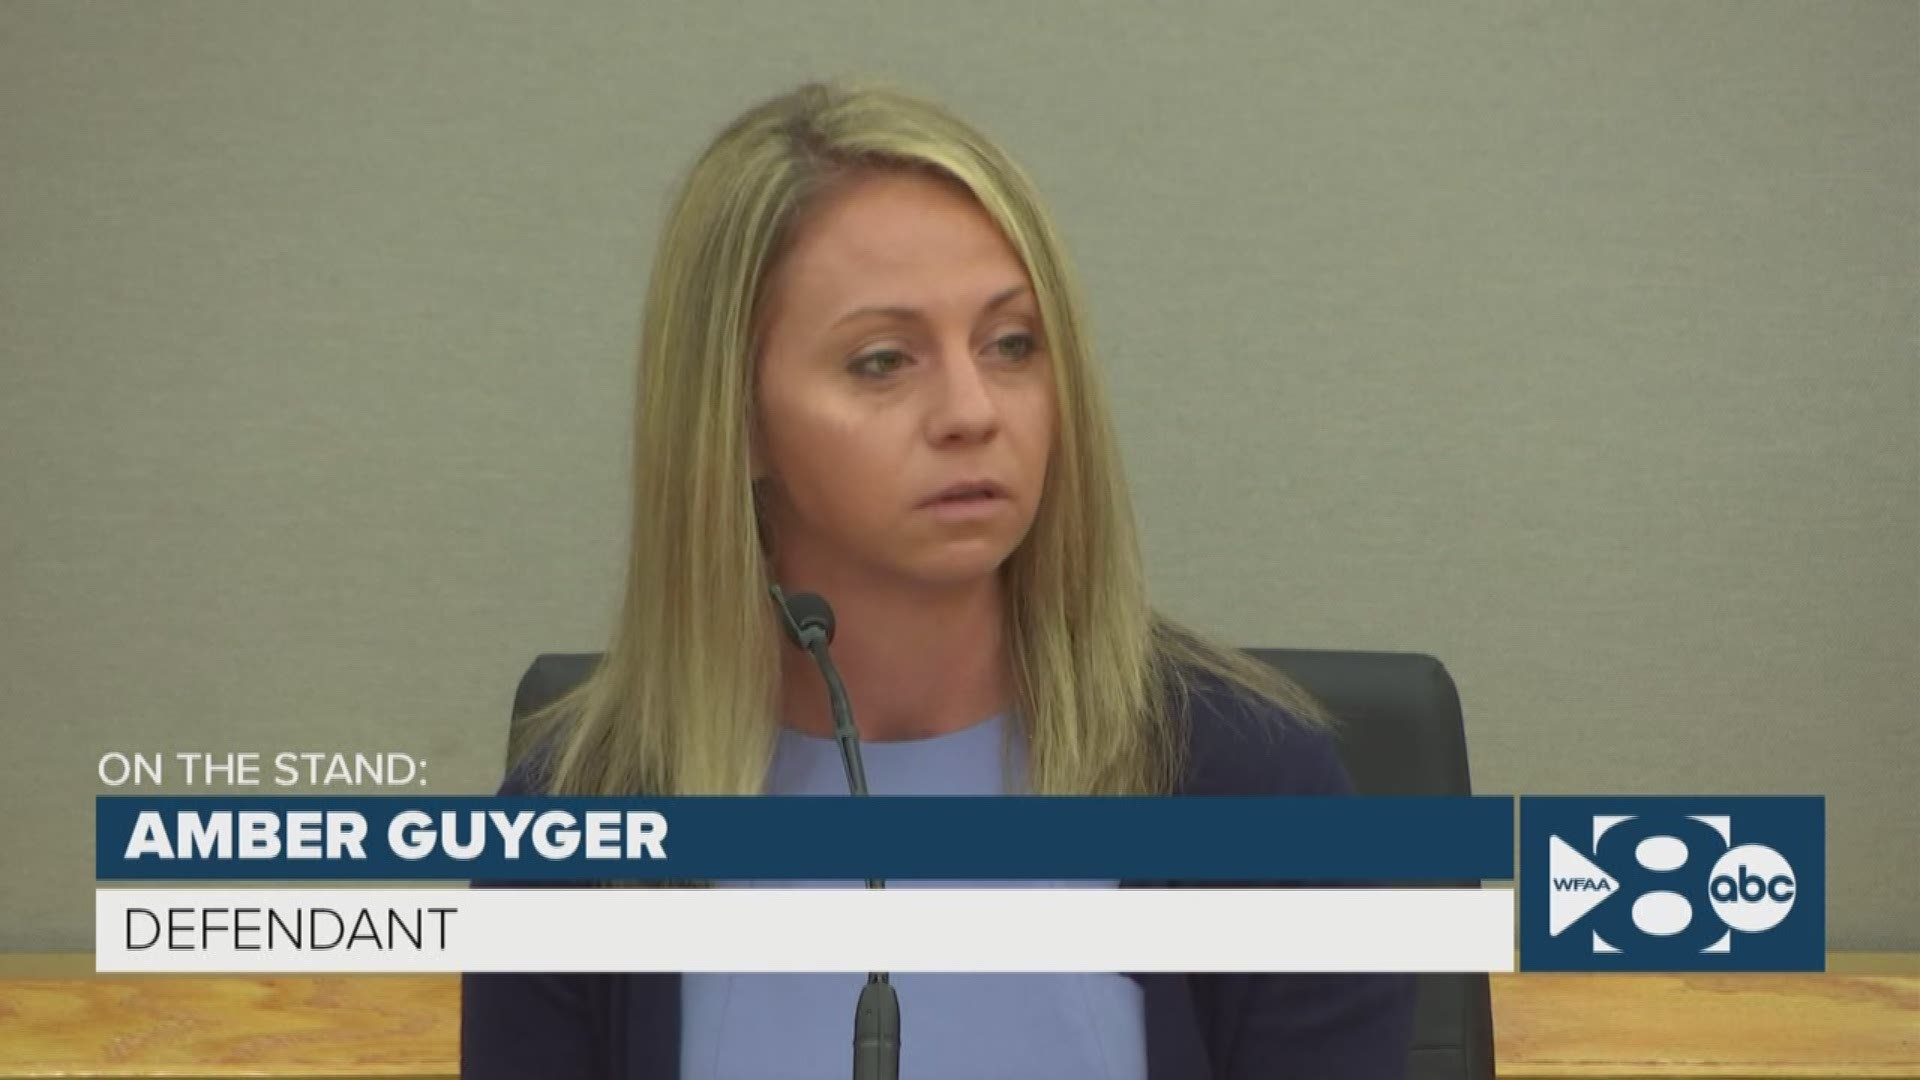 Amber Guyger took the witness stand to testify in her defense.